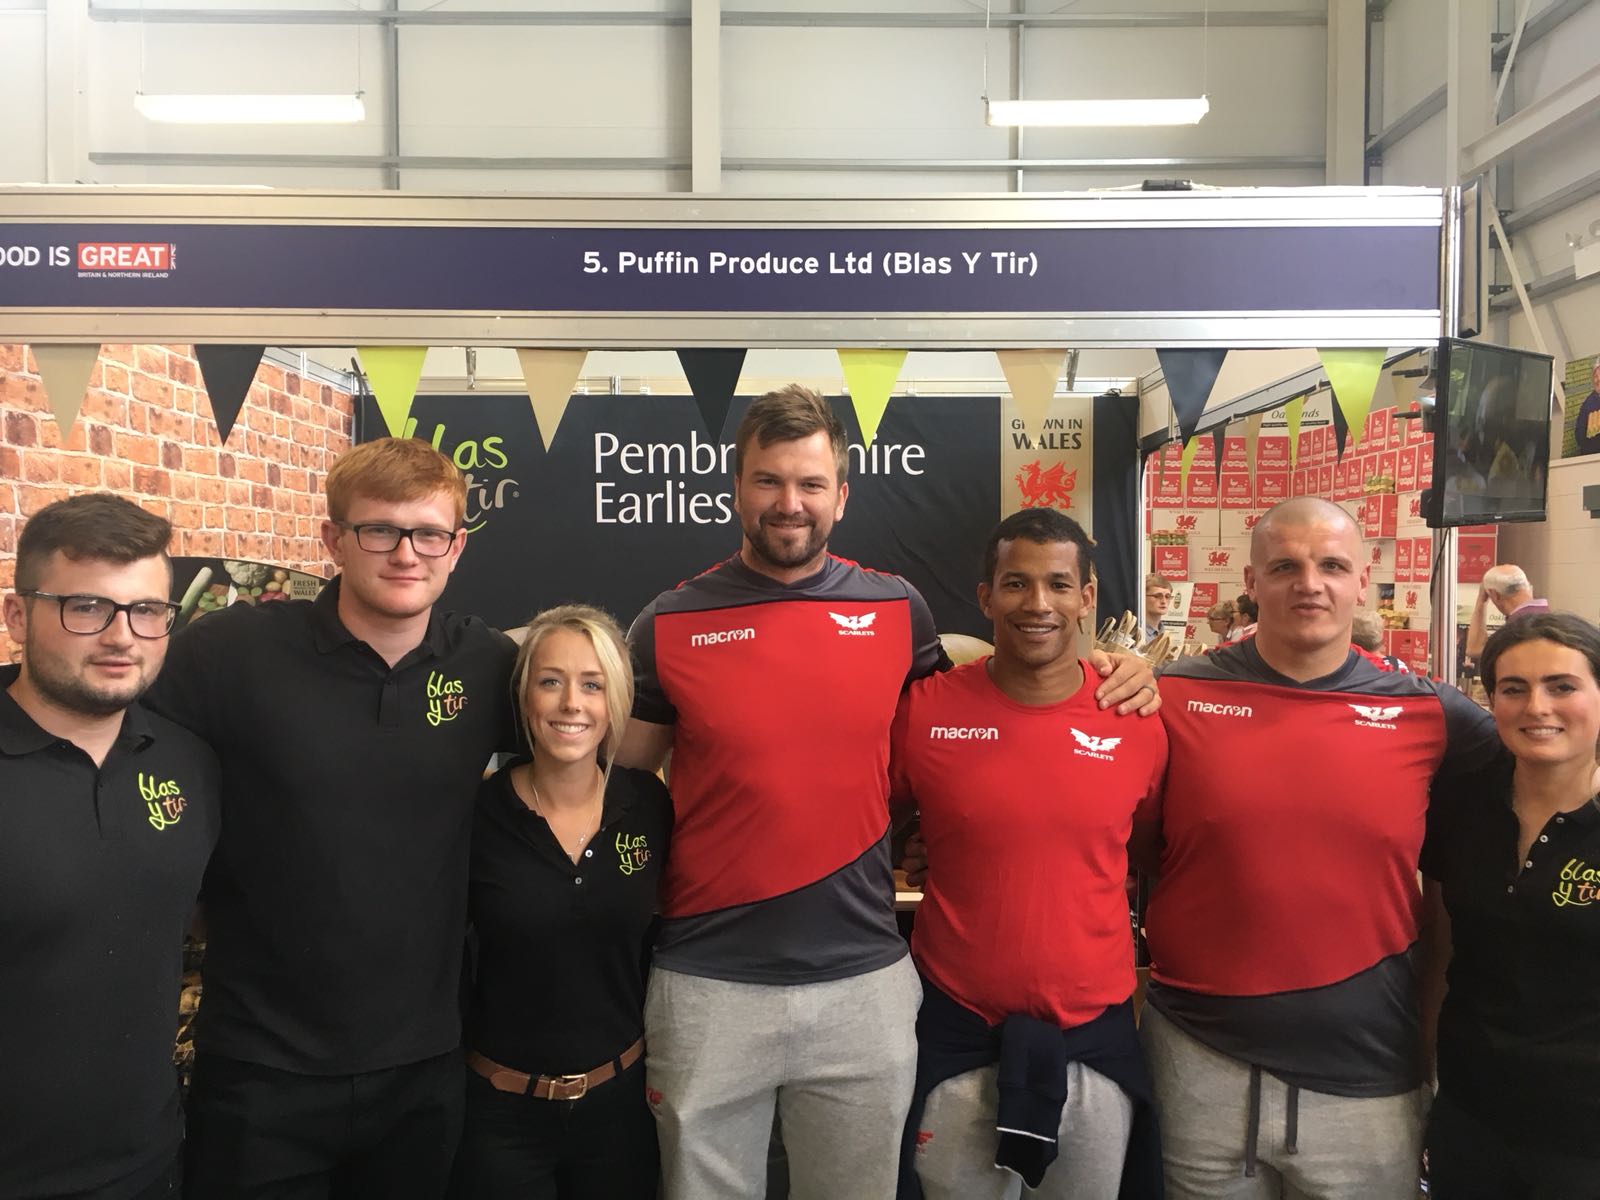 Scarlets Rugby Team visiting the Blas y Tir stand at the Royal Welsh Show 2018